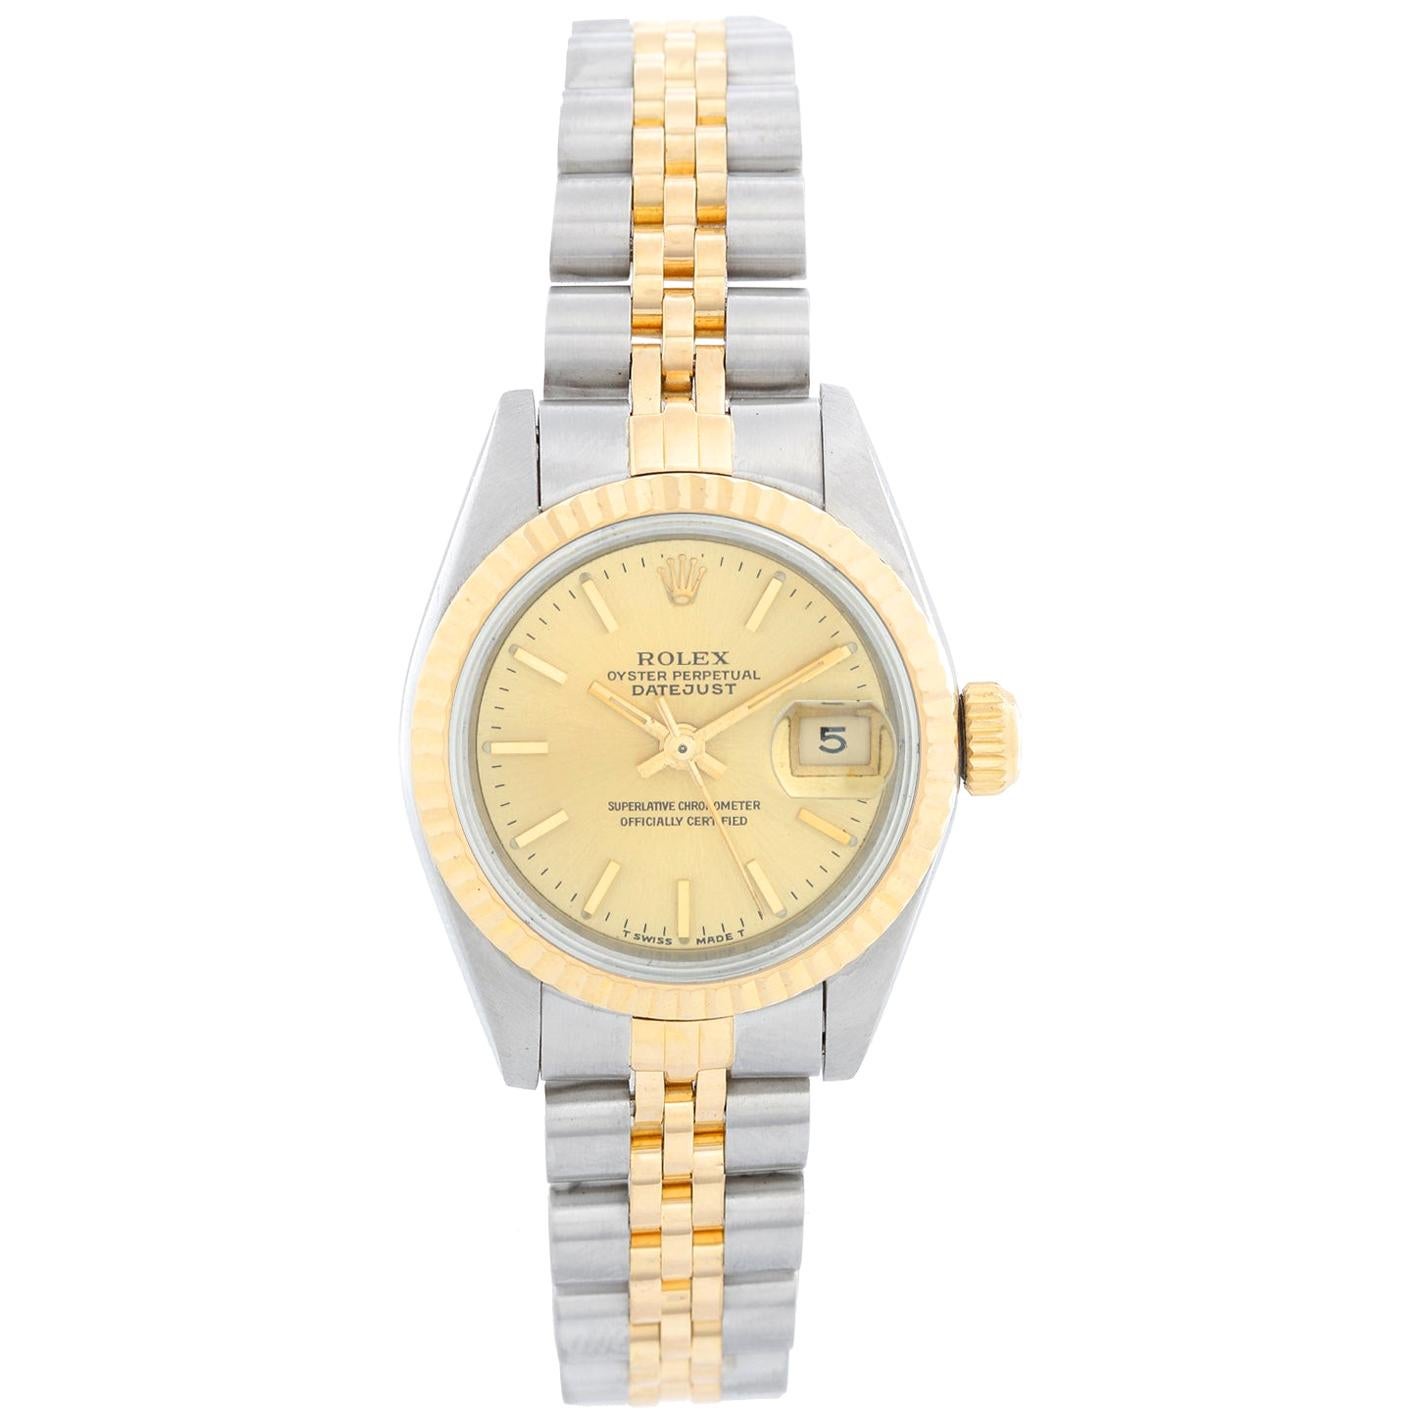 Rolex 2-Tone Datejust Steel and Gold Ladies Watch 69173